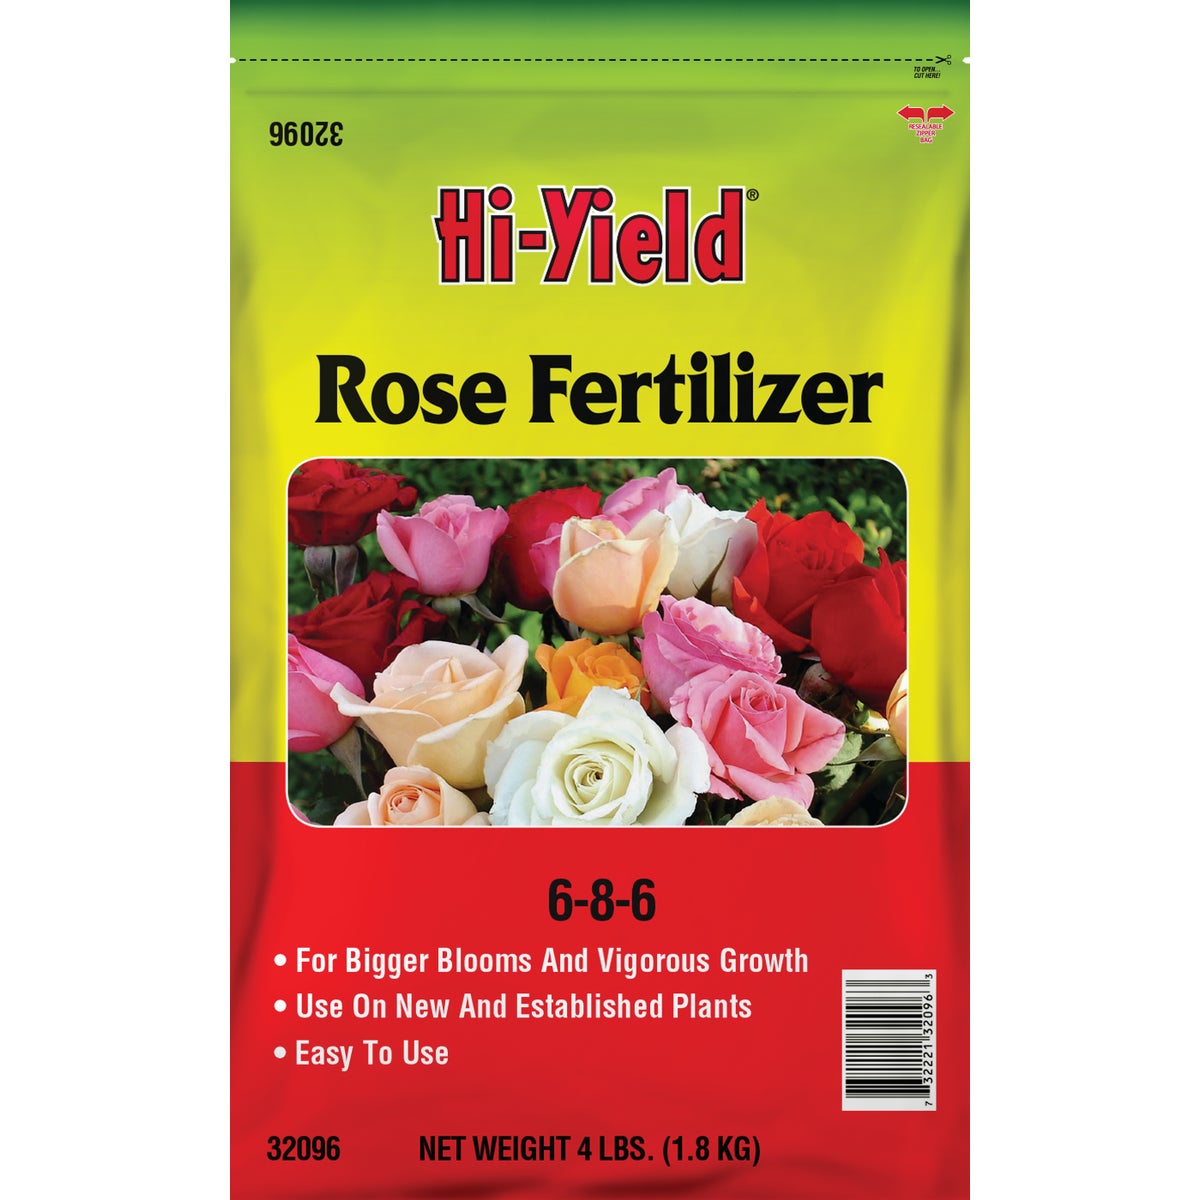 Item 700693, Specially formulated to promote bigger blooms, nutrient healthy stems, and 